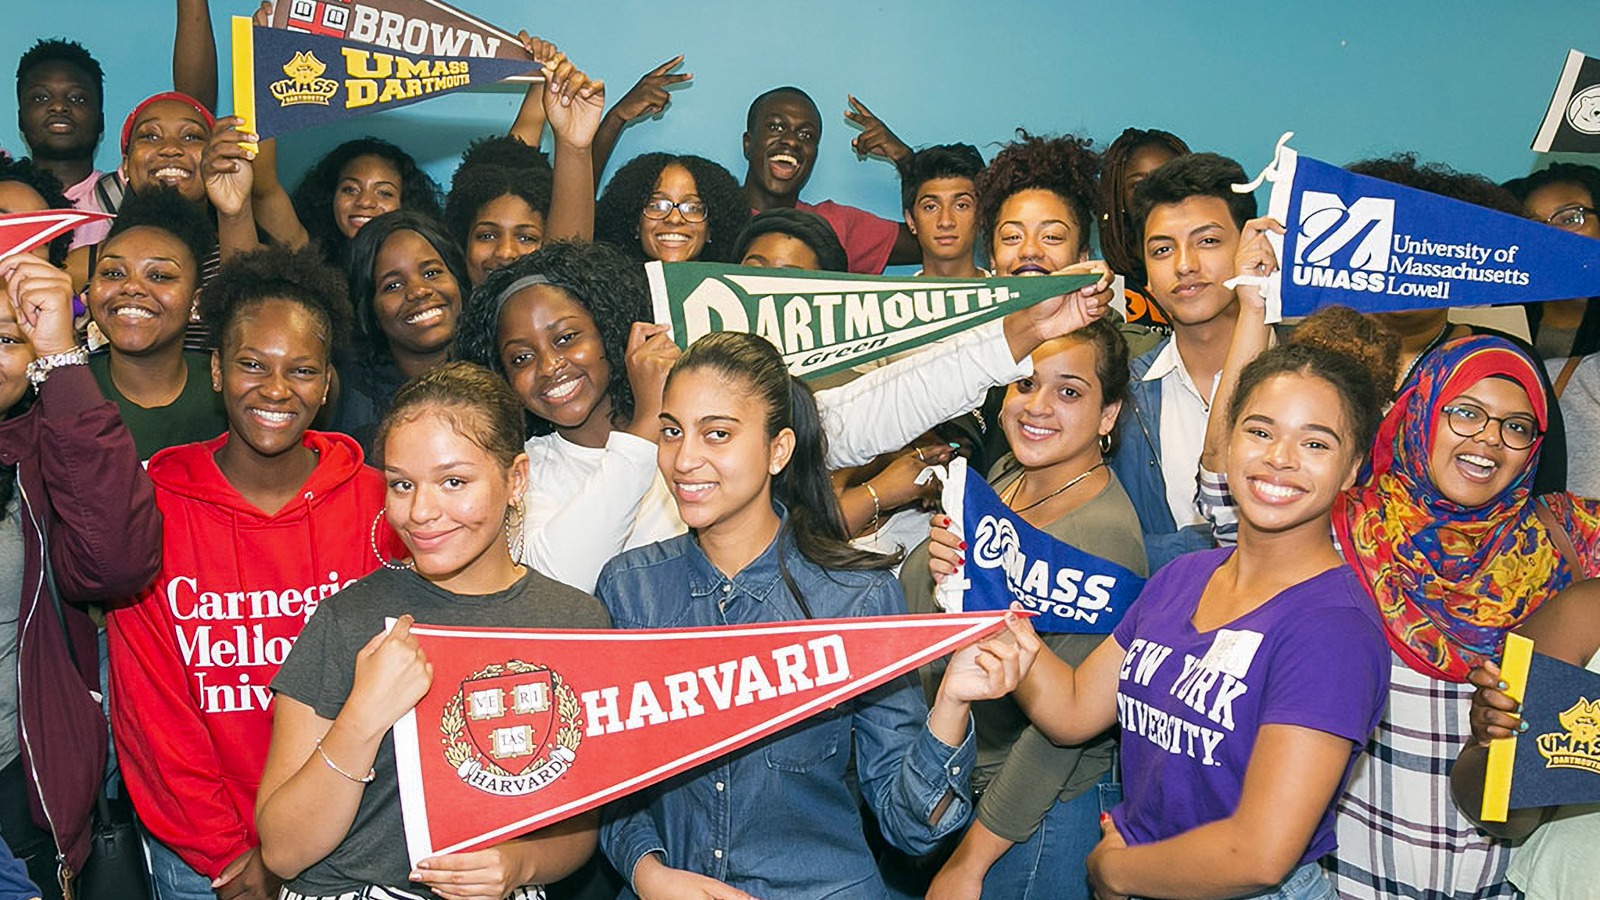 A group of Let's Get Ready participants showing off their college pride with specific university banners.